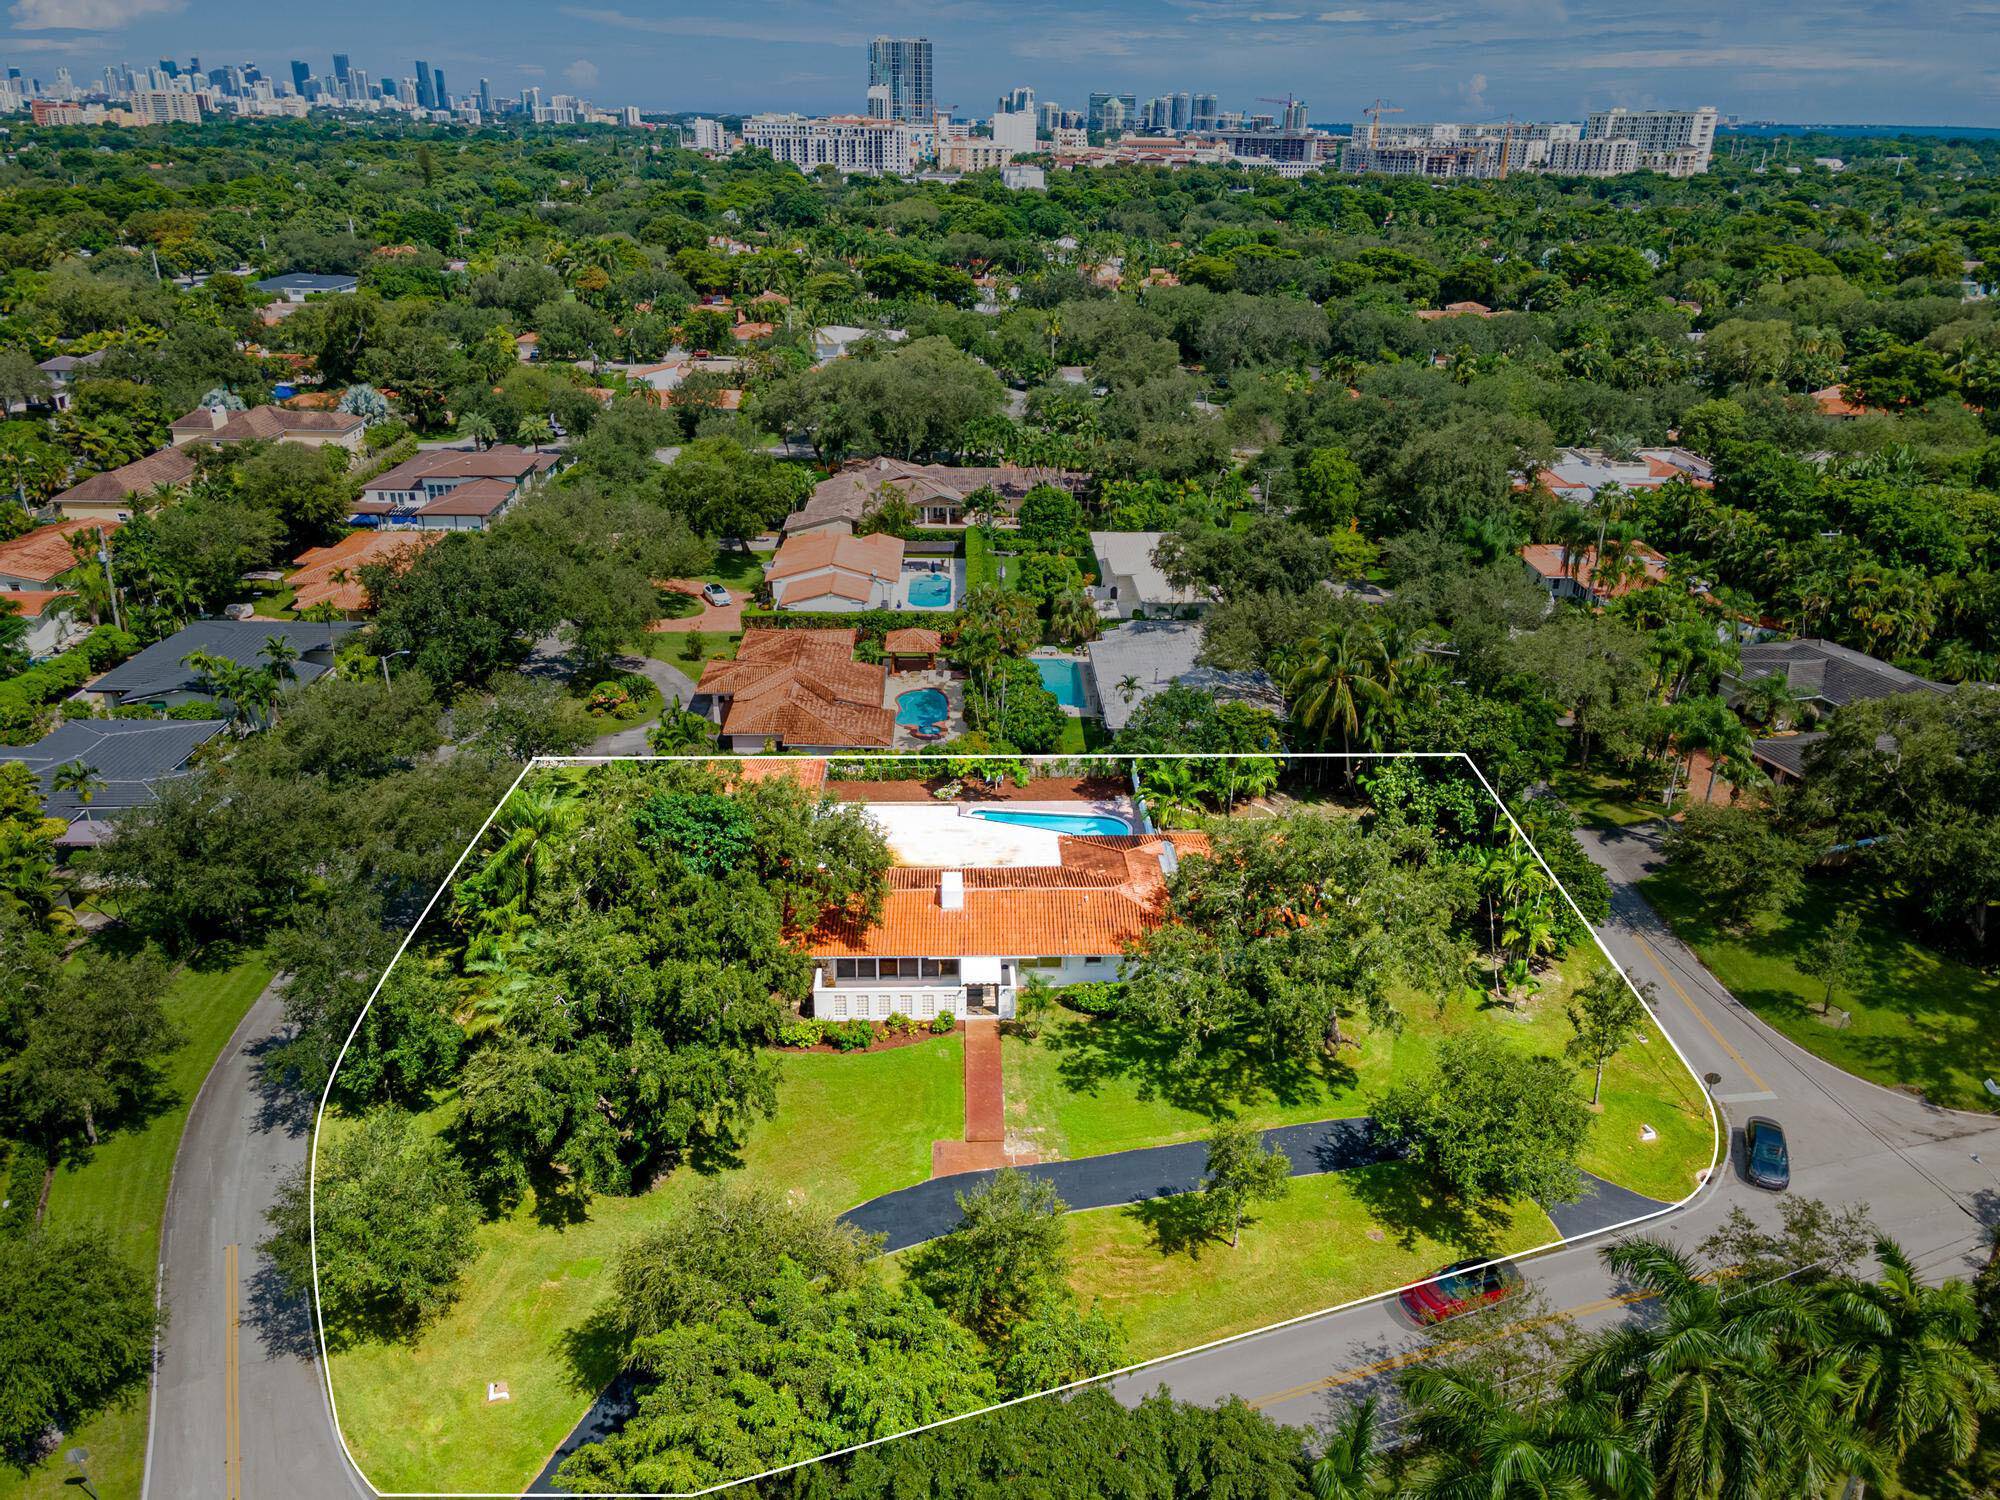 Rare opportunity to acquire a 2 3 acre double corner lot located on the prestigious and sought after ''A Listed'' Granada Blvd in the heart of beautiful Coral Gables.